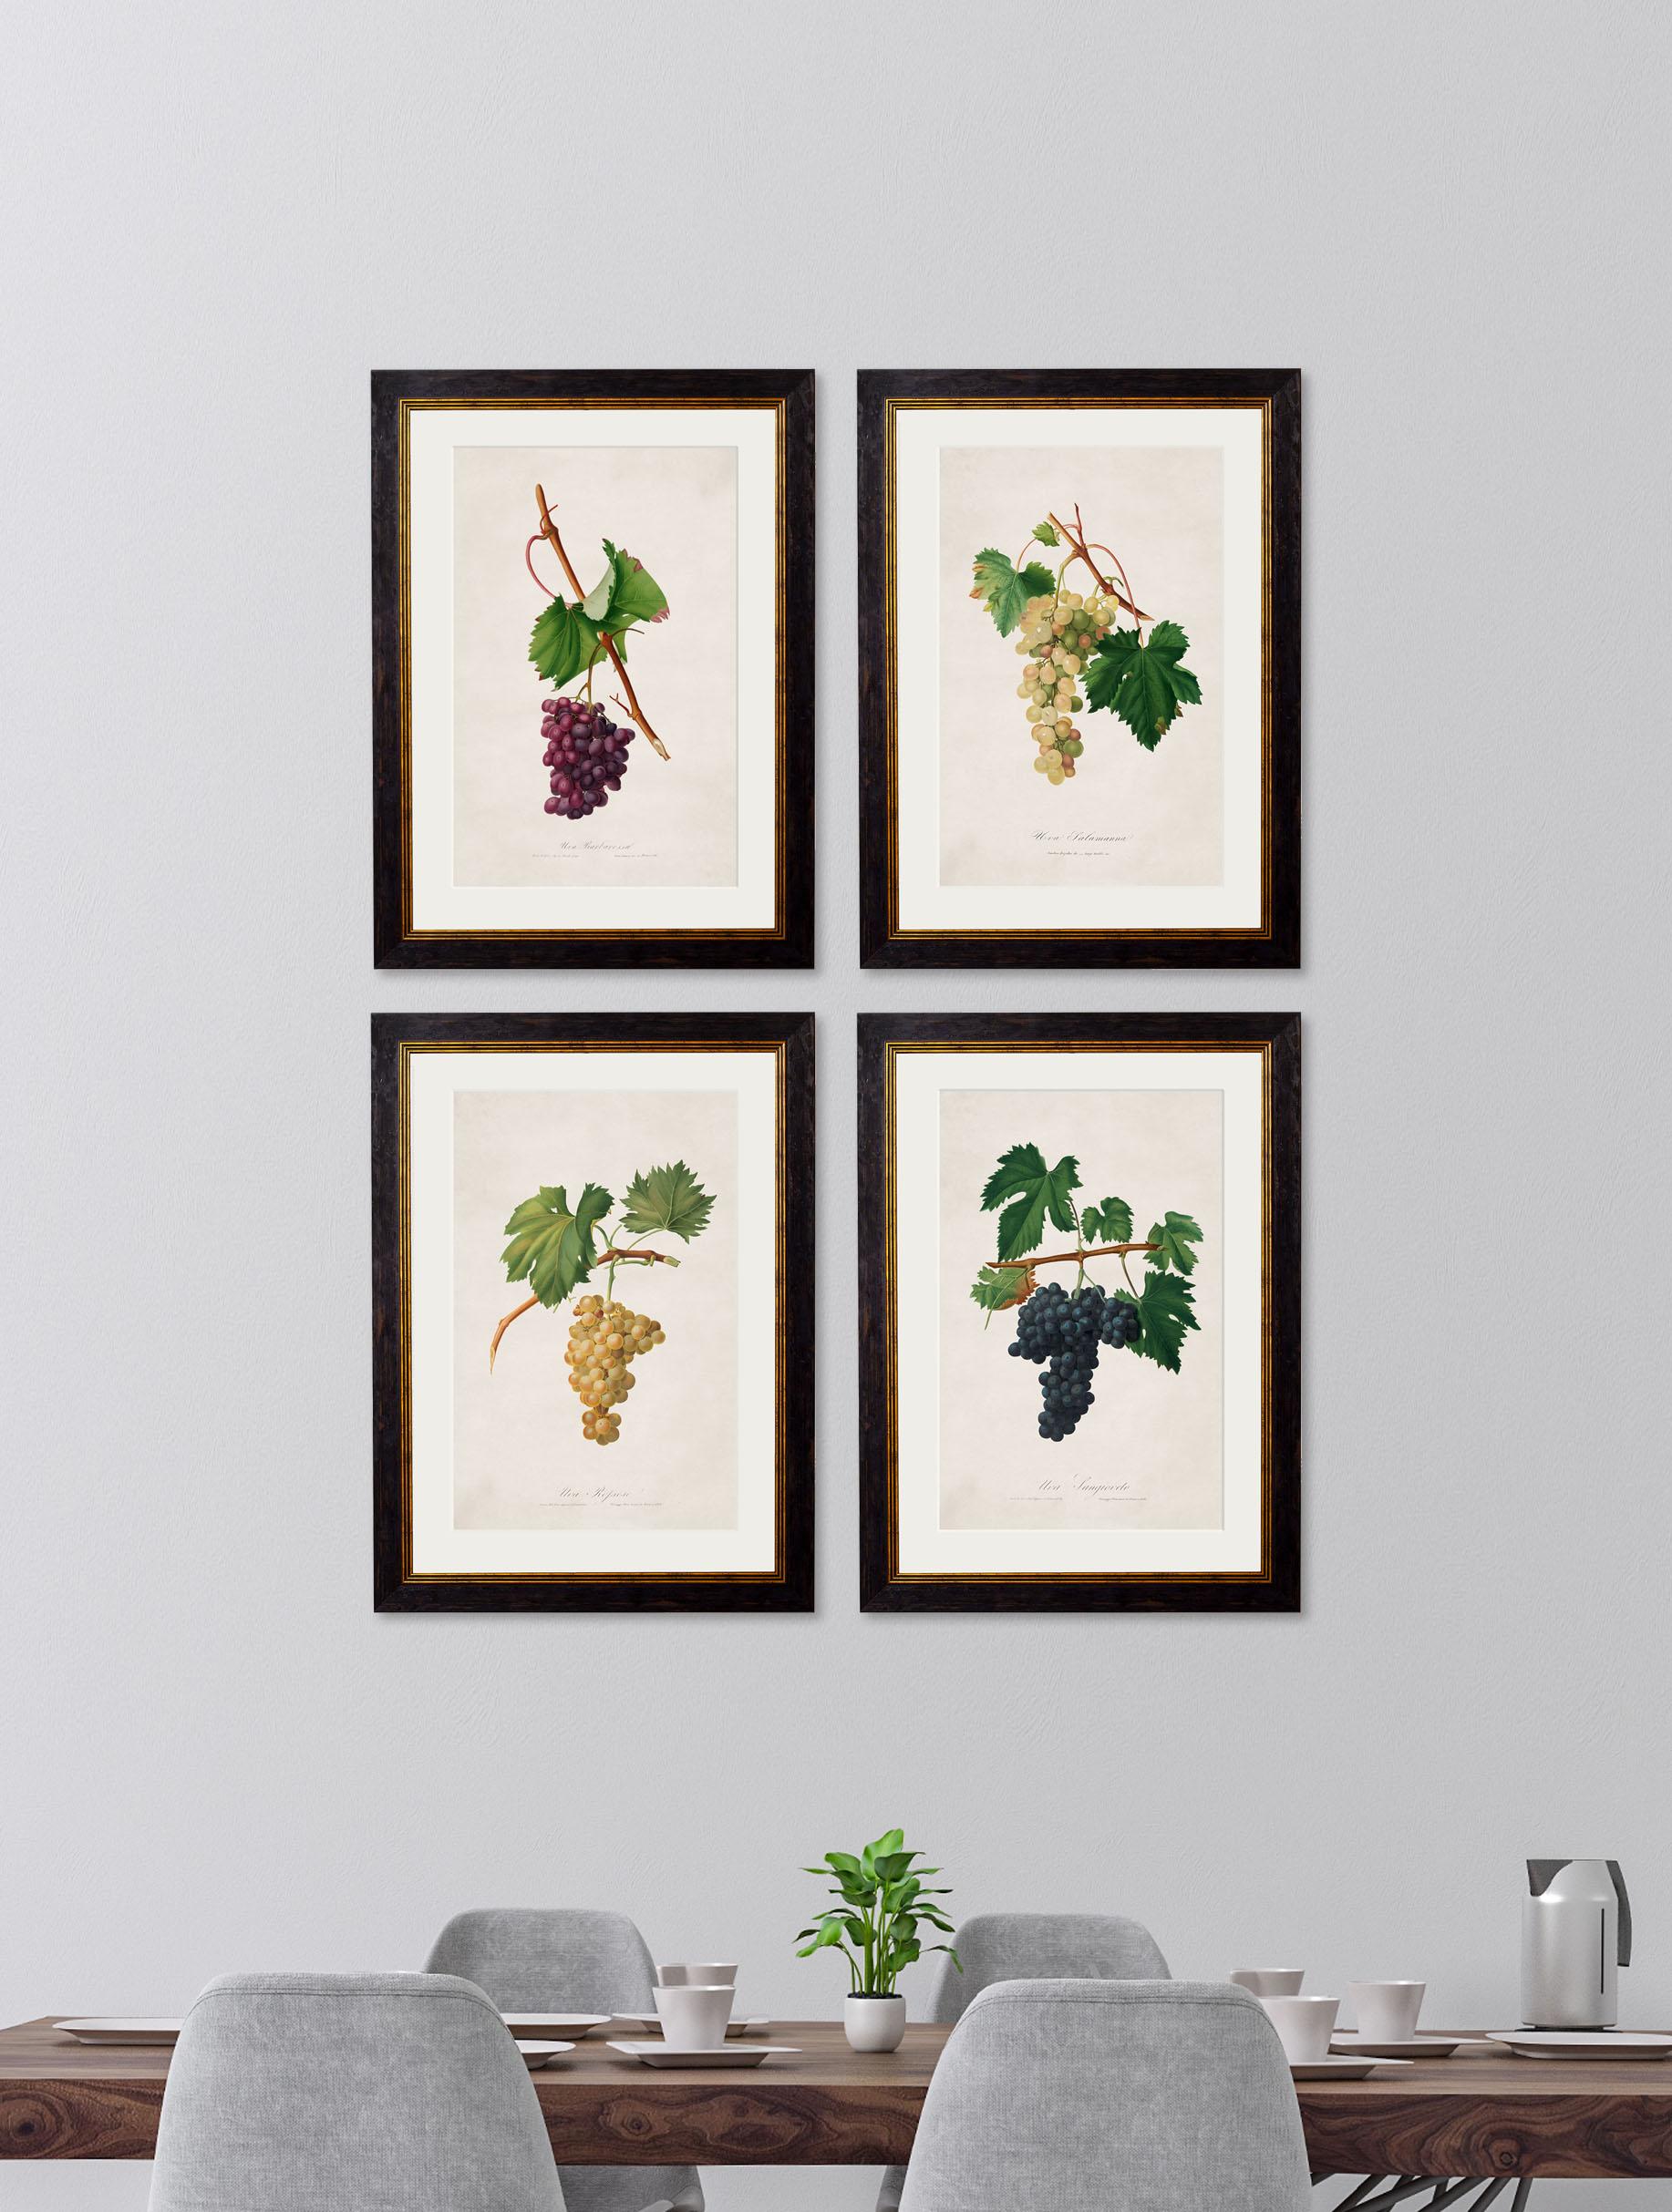 These are a set of FOUR digitally remastered prints of Grape studies, hand coloured and framed, originally from French drawings,  Circa 1817.

Prints of this style were originally printed in black and white and then hand painted over the top to give